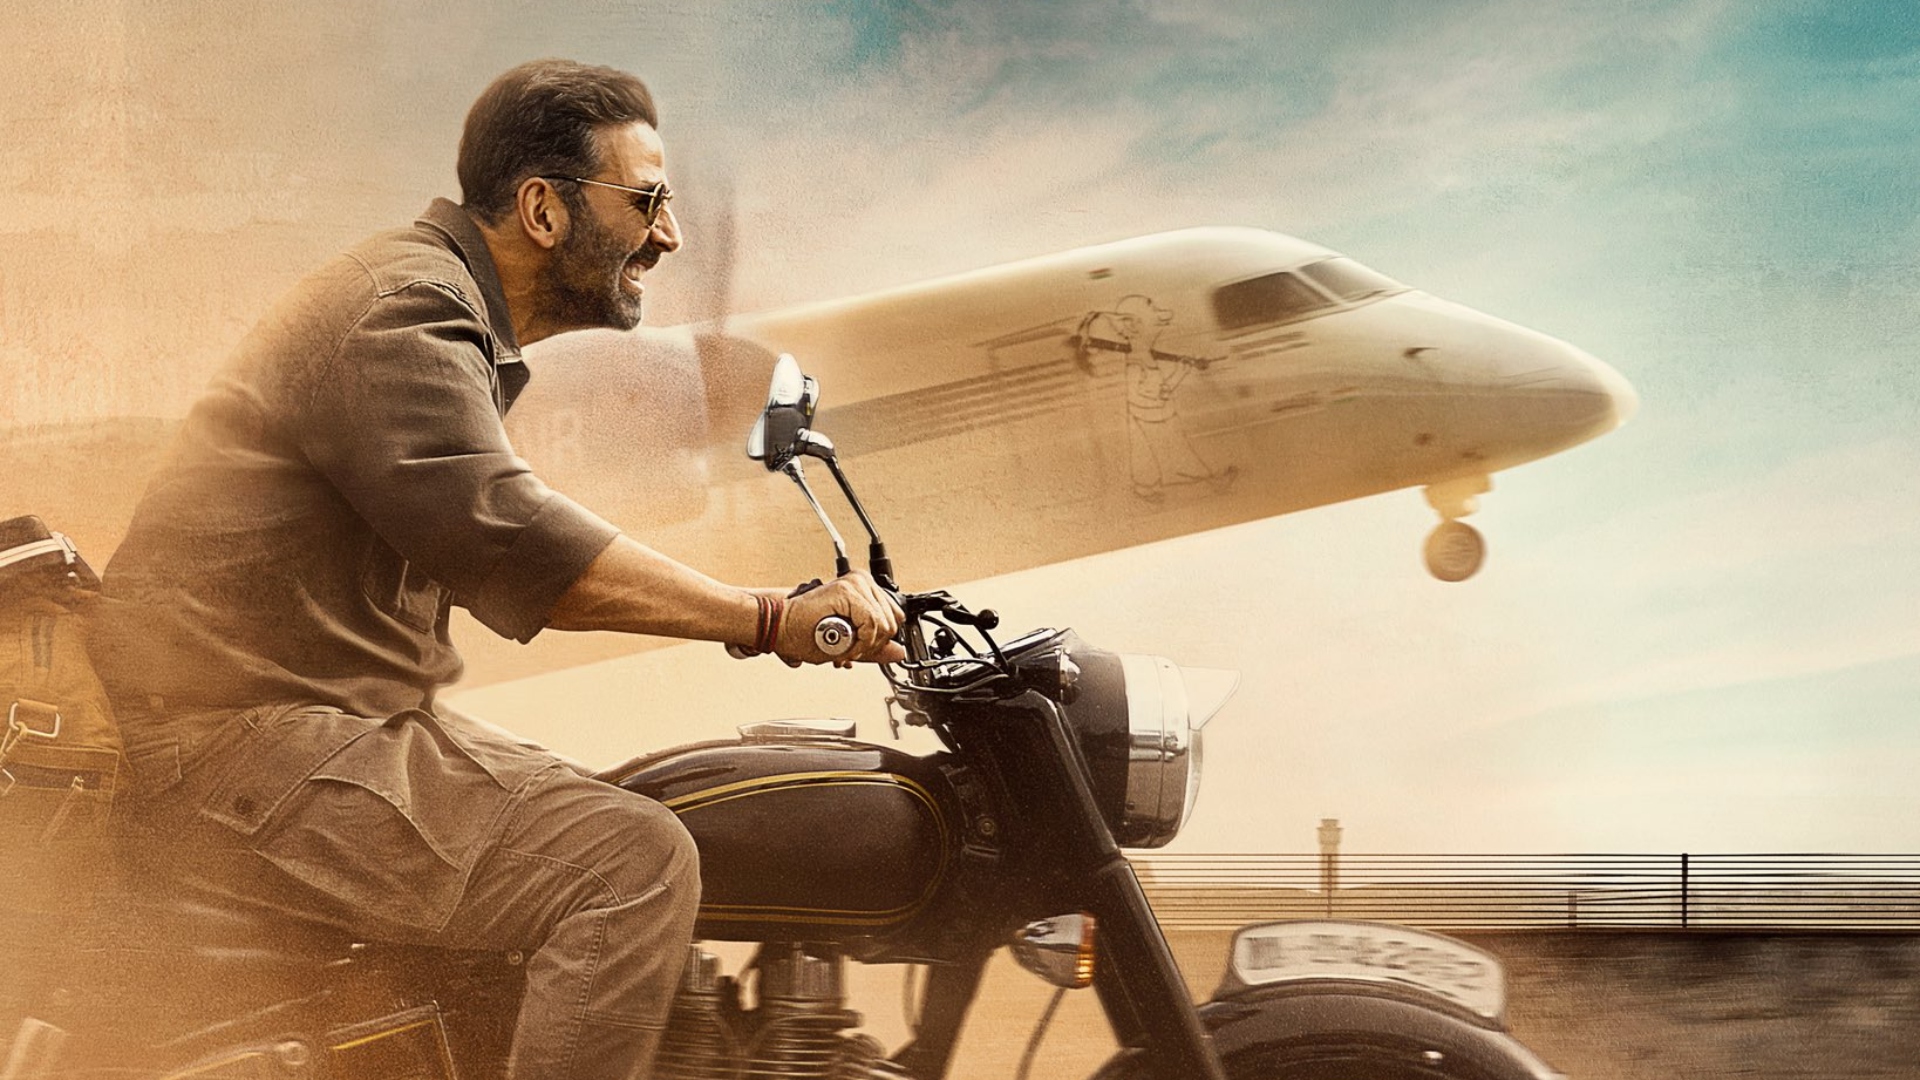 ‘Sarfira’ Box Office Collection Update: How Much Did Akshay Kumar’s Film Earn On Day 5?